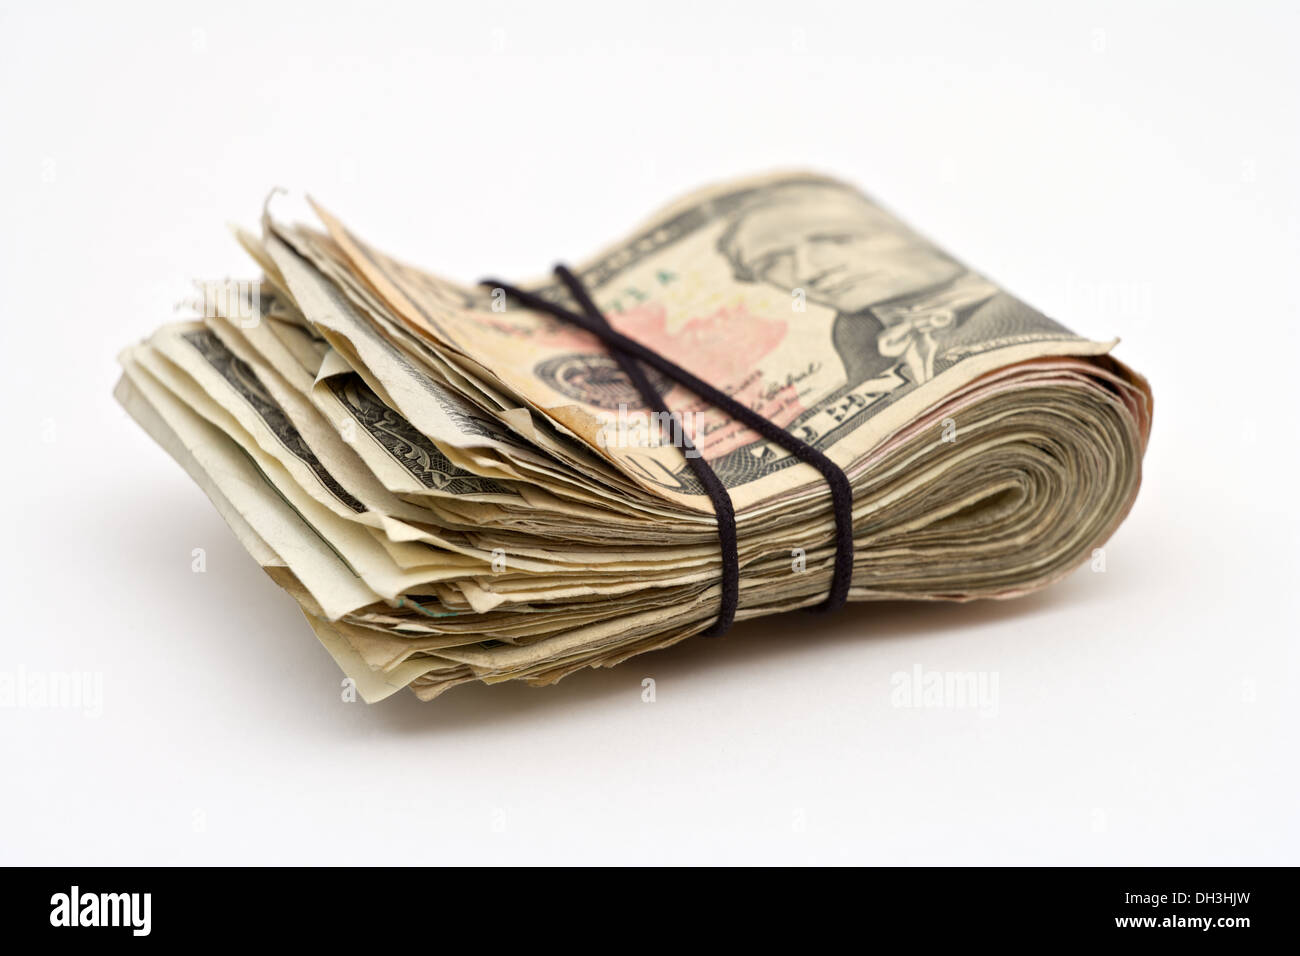 Closeup of a wad of American money tied together with a rubber band Stock Photo